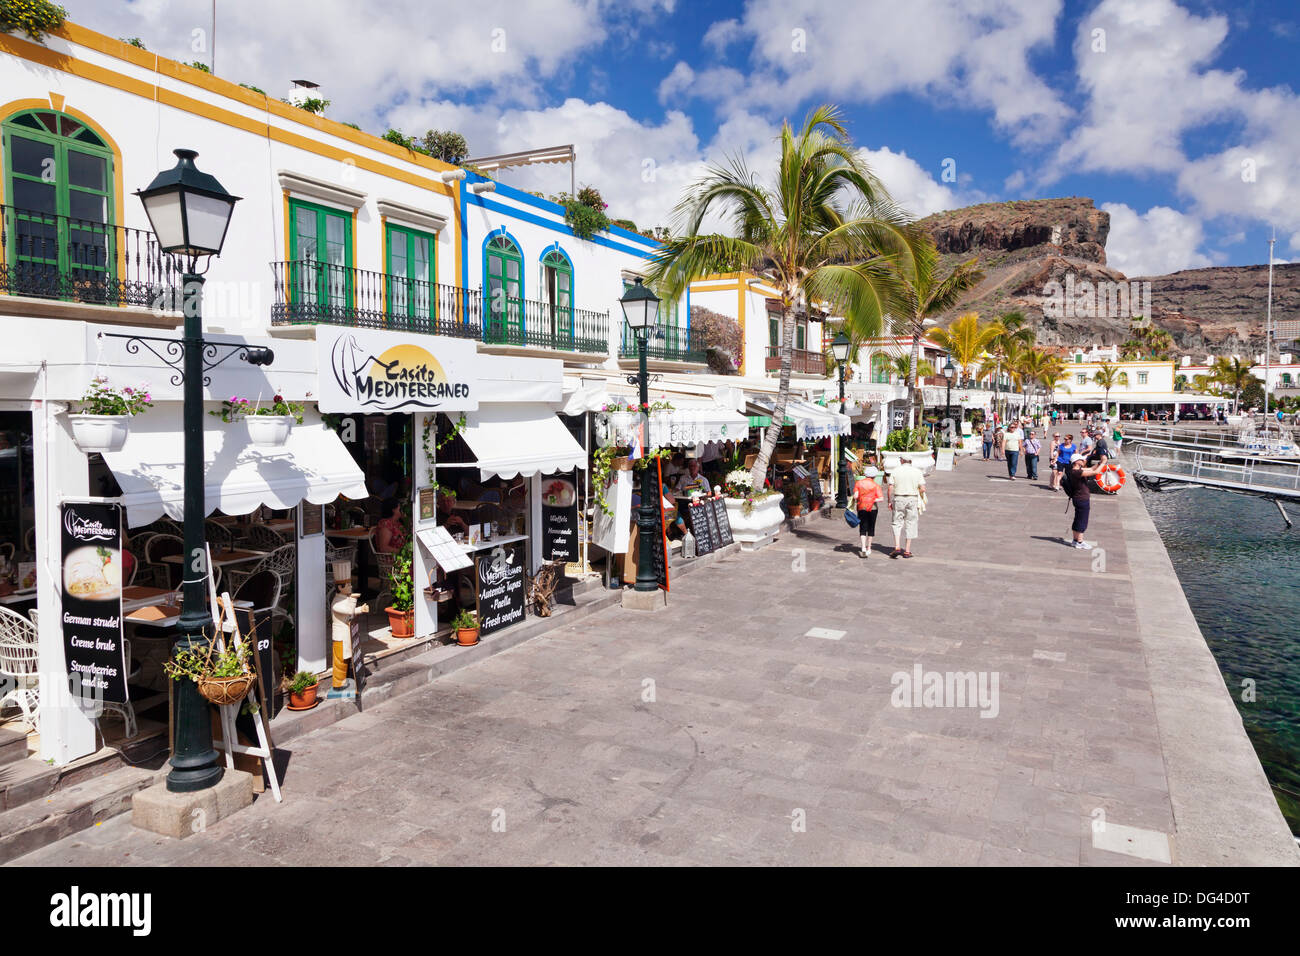 Restaurants and shops along the promenade in the old town, Puerto de Mogan, Gran Canaria, Canary Islands, Spain, Europe Stock Photo